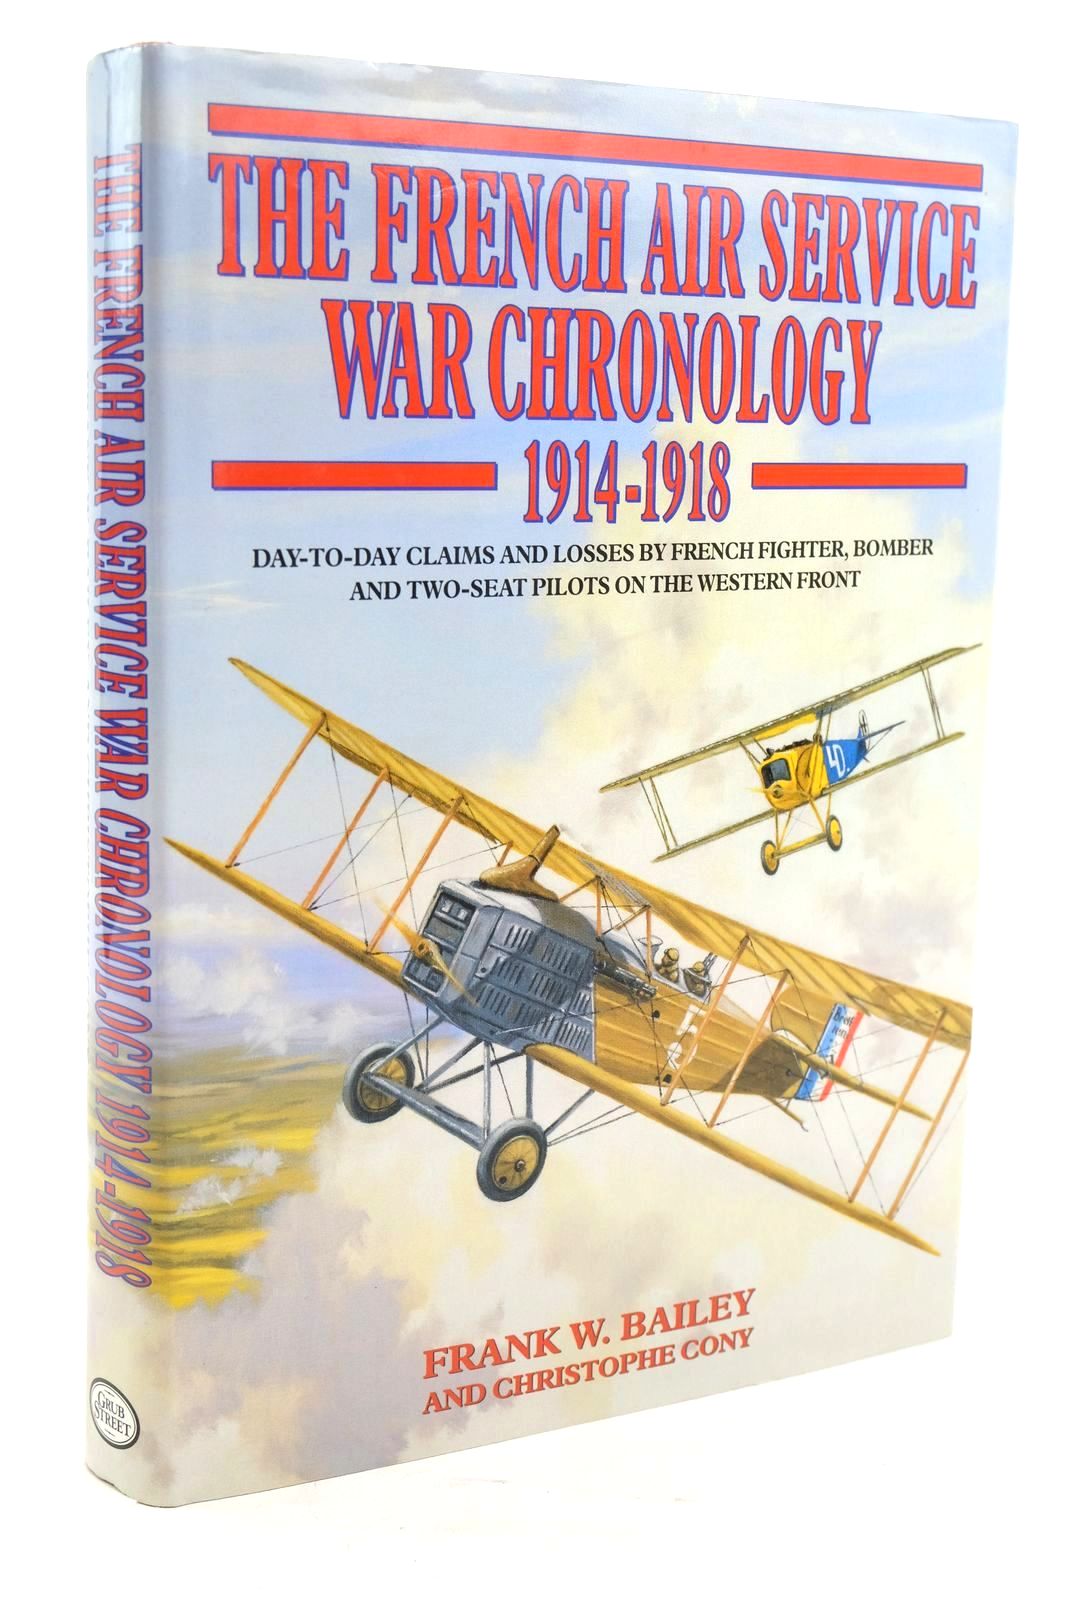 Photo of FRENCH AIR SERVICE WAR CHRONOLOGY 1914-1918 written by Bailey, Frank W. Cony, Christophe published by Grub Street (STOCK CODE: 1320180)  for sale by Stella & Rose's Books